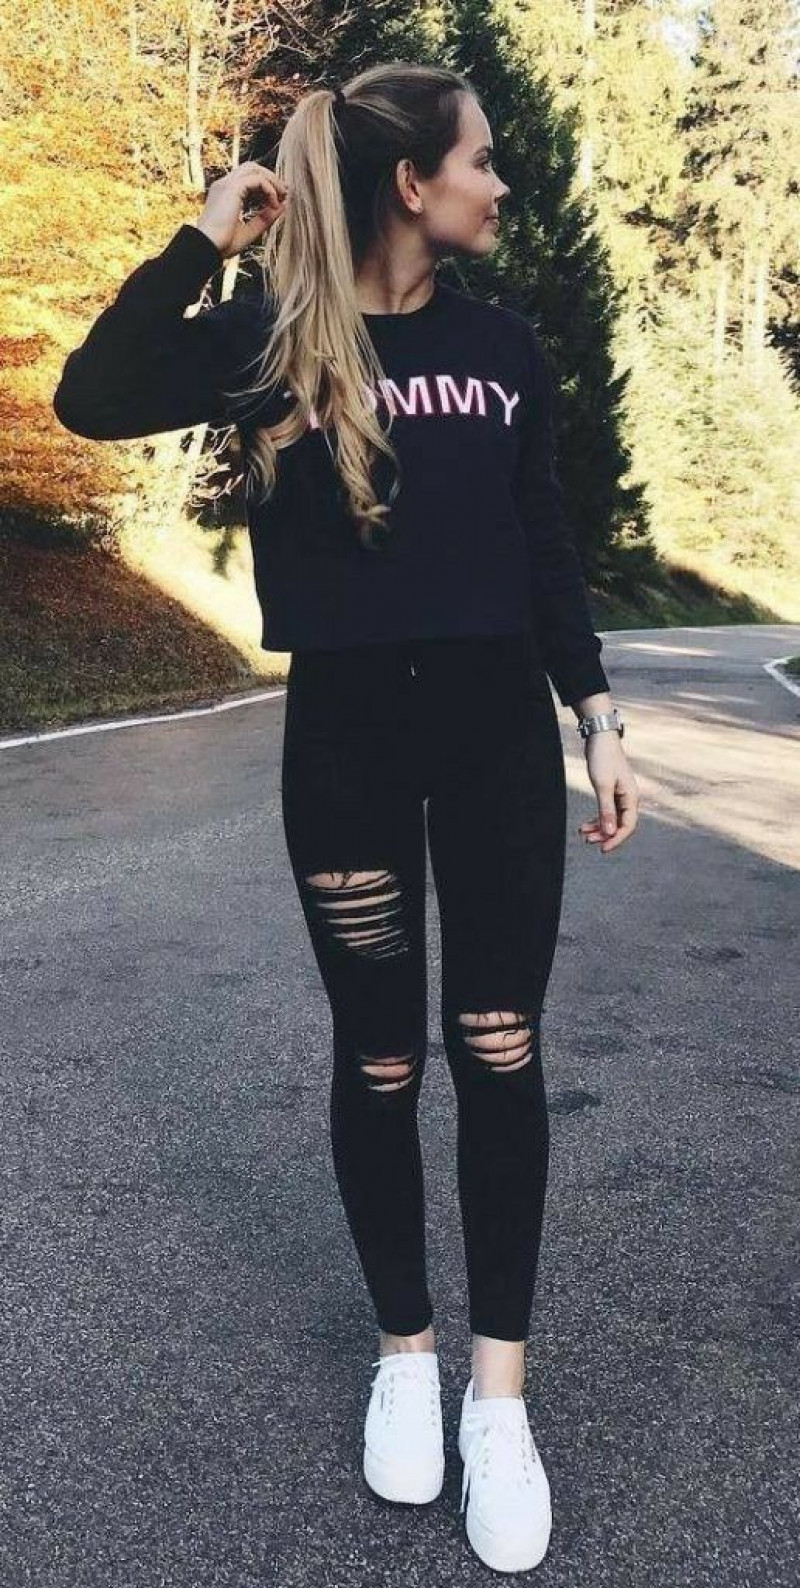 Black Long Sleeves T-Shirt, Black Knitwear Sportswear Legging, Black Jeans And White Shoes Outfits